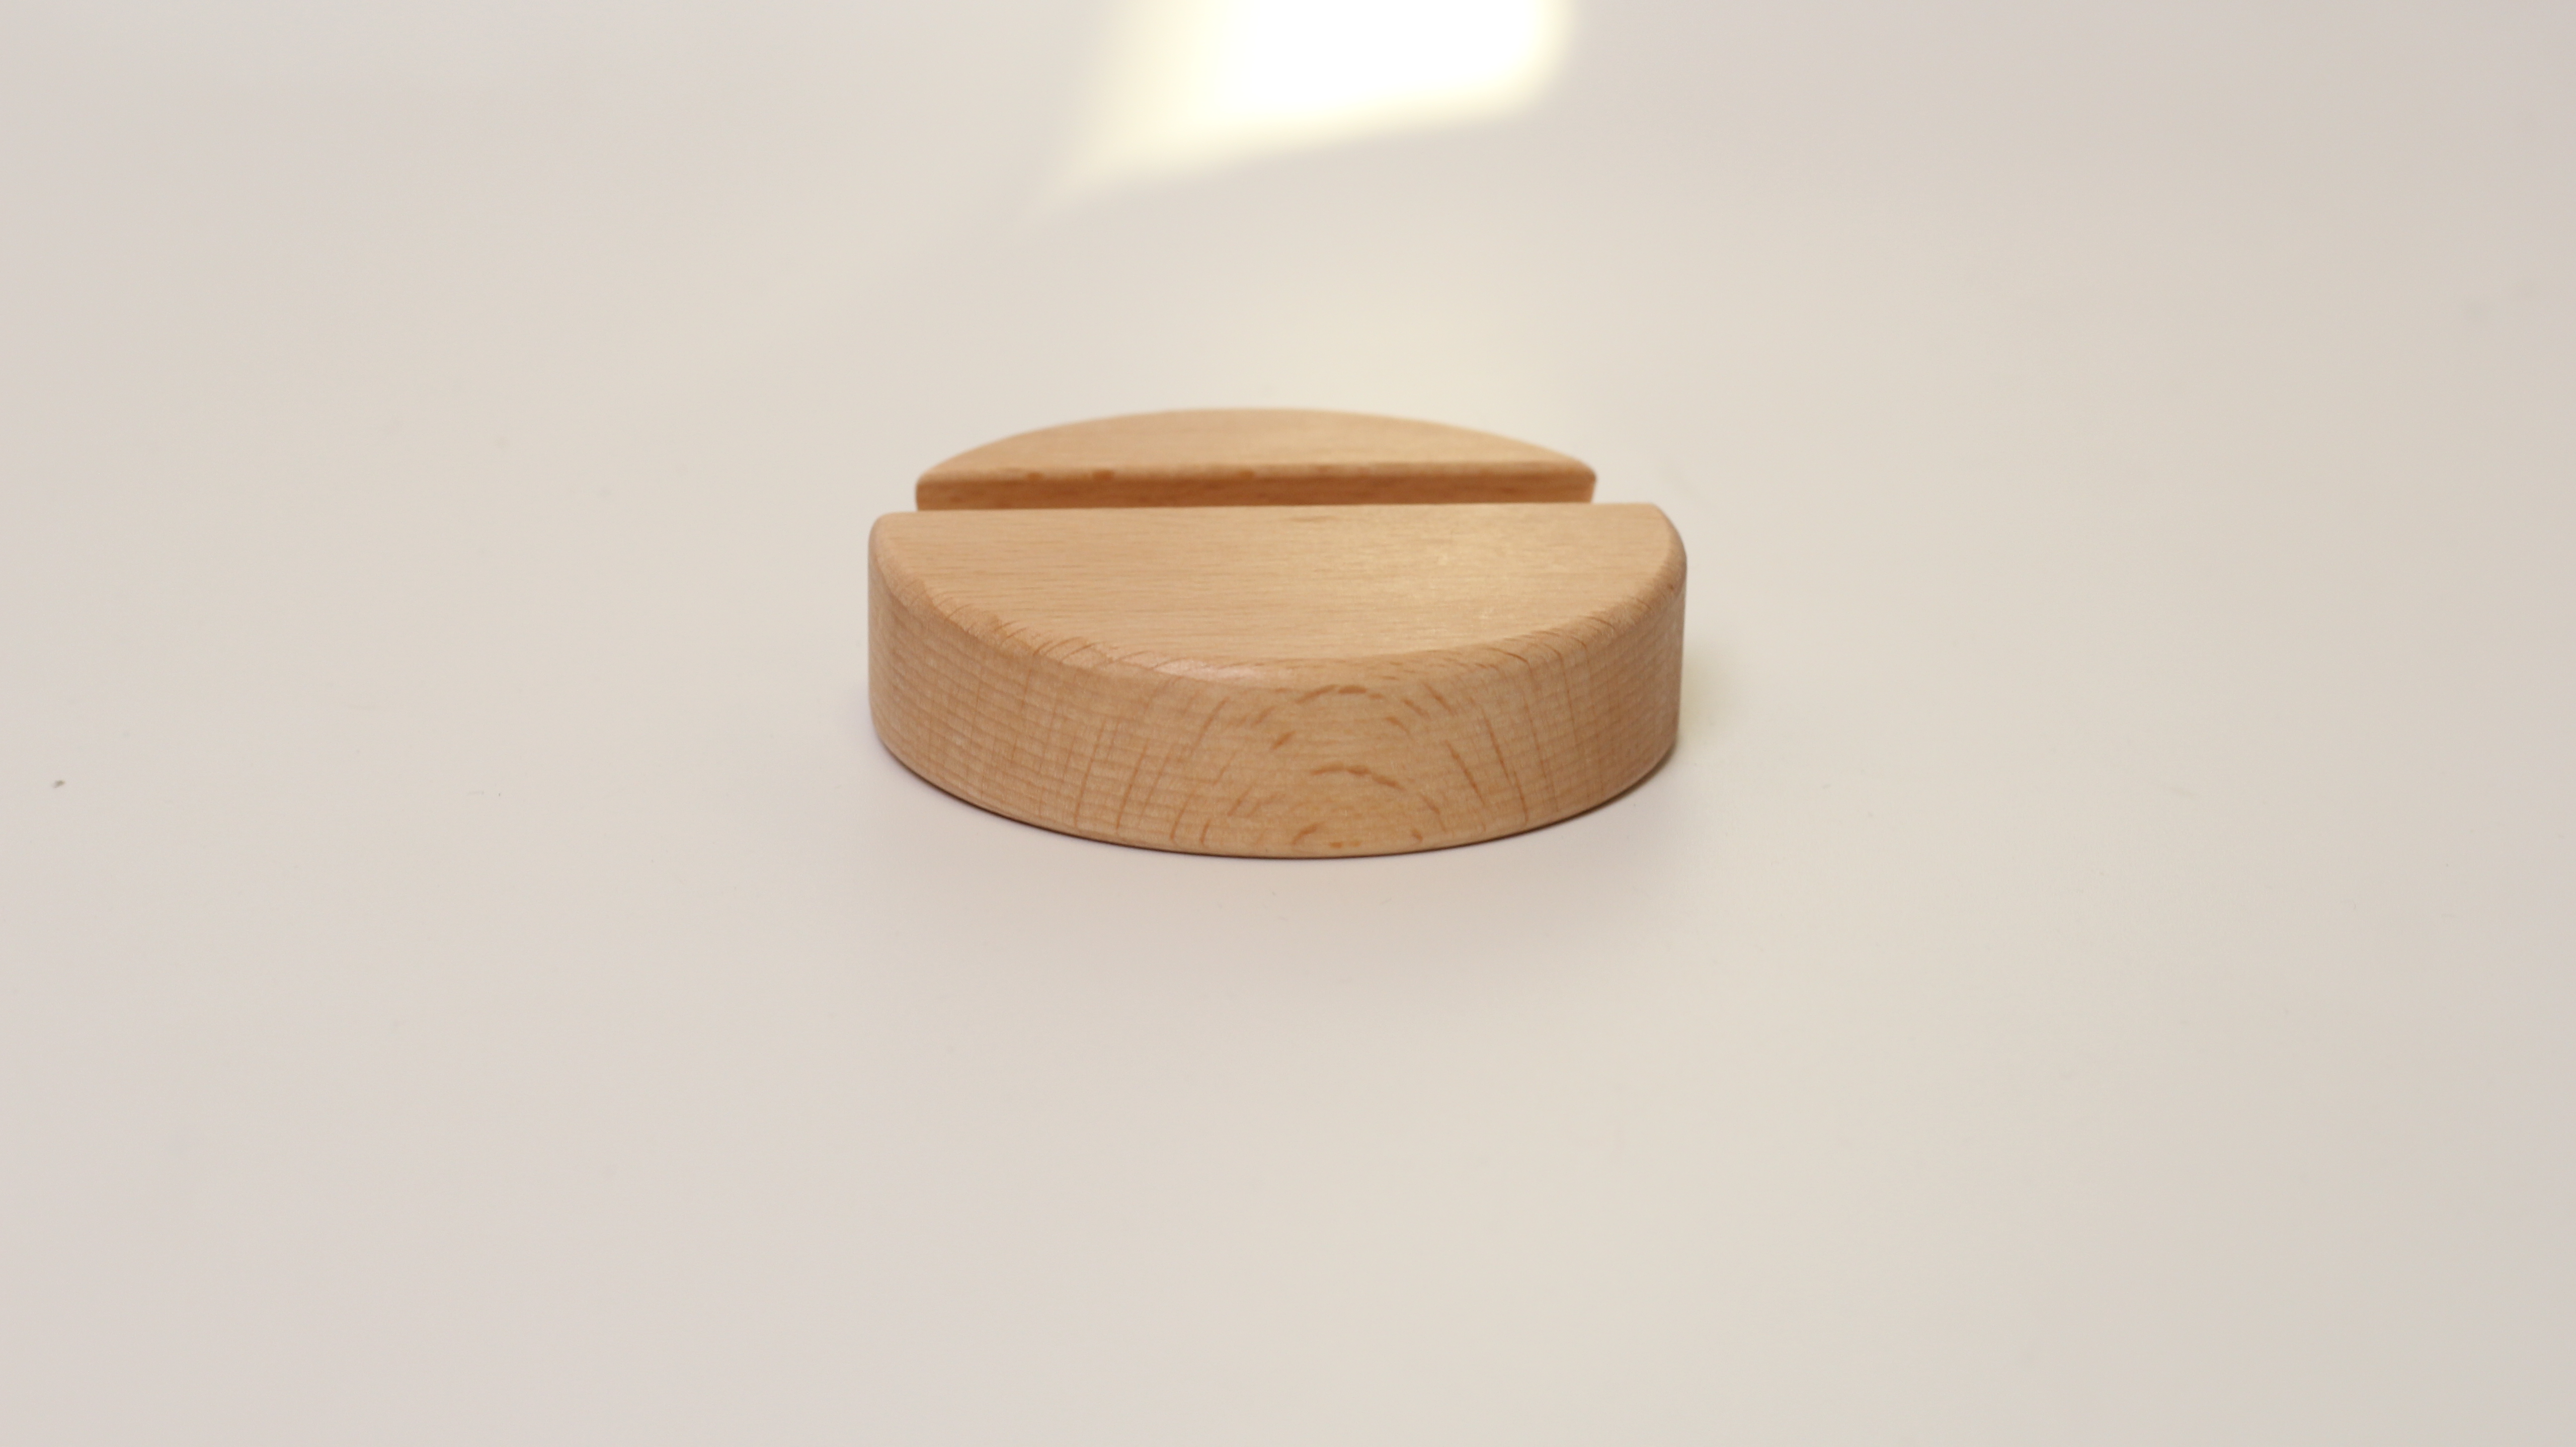 Round bamboo and wood mobile phone bracket